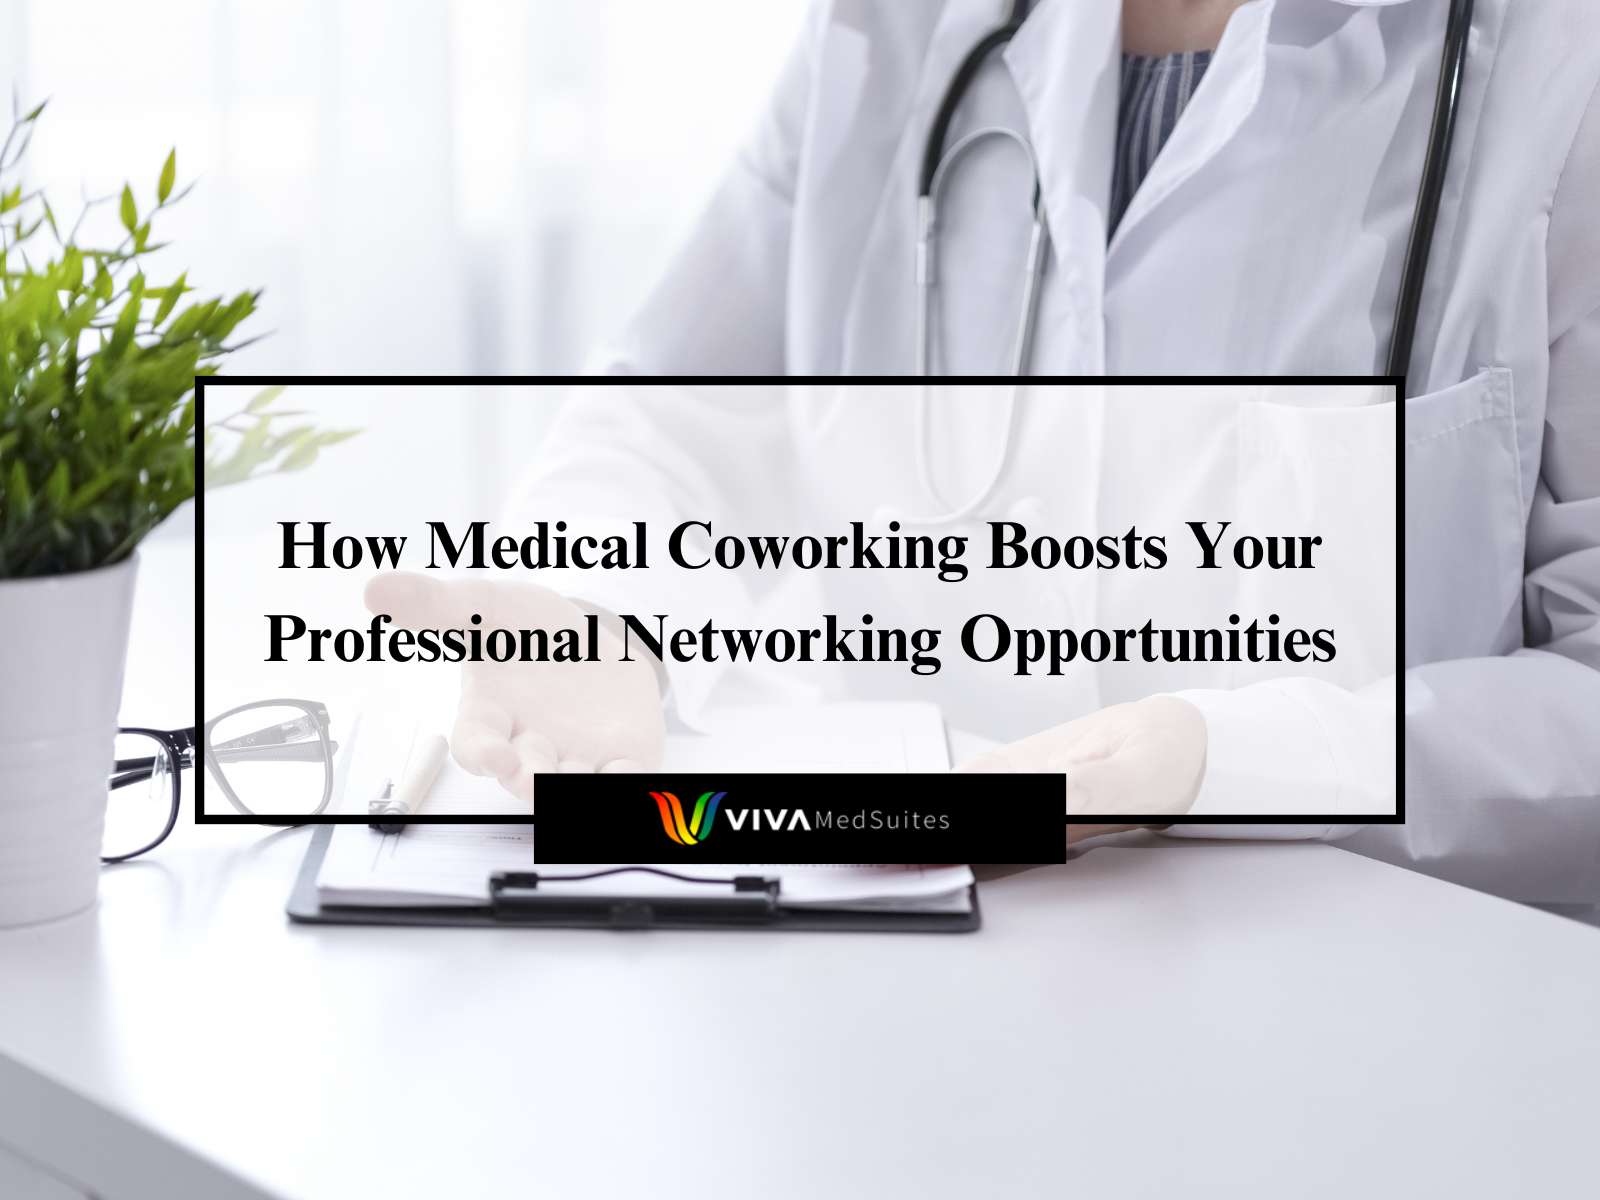 How Medical Coworking Boosts Your Professional Networking Opportunities